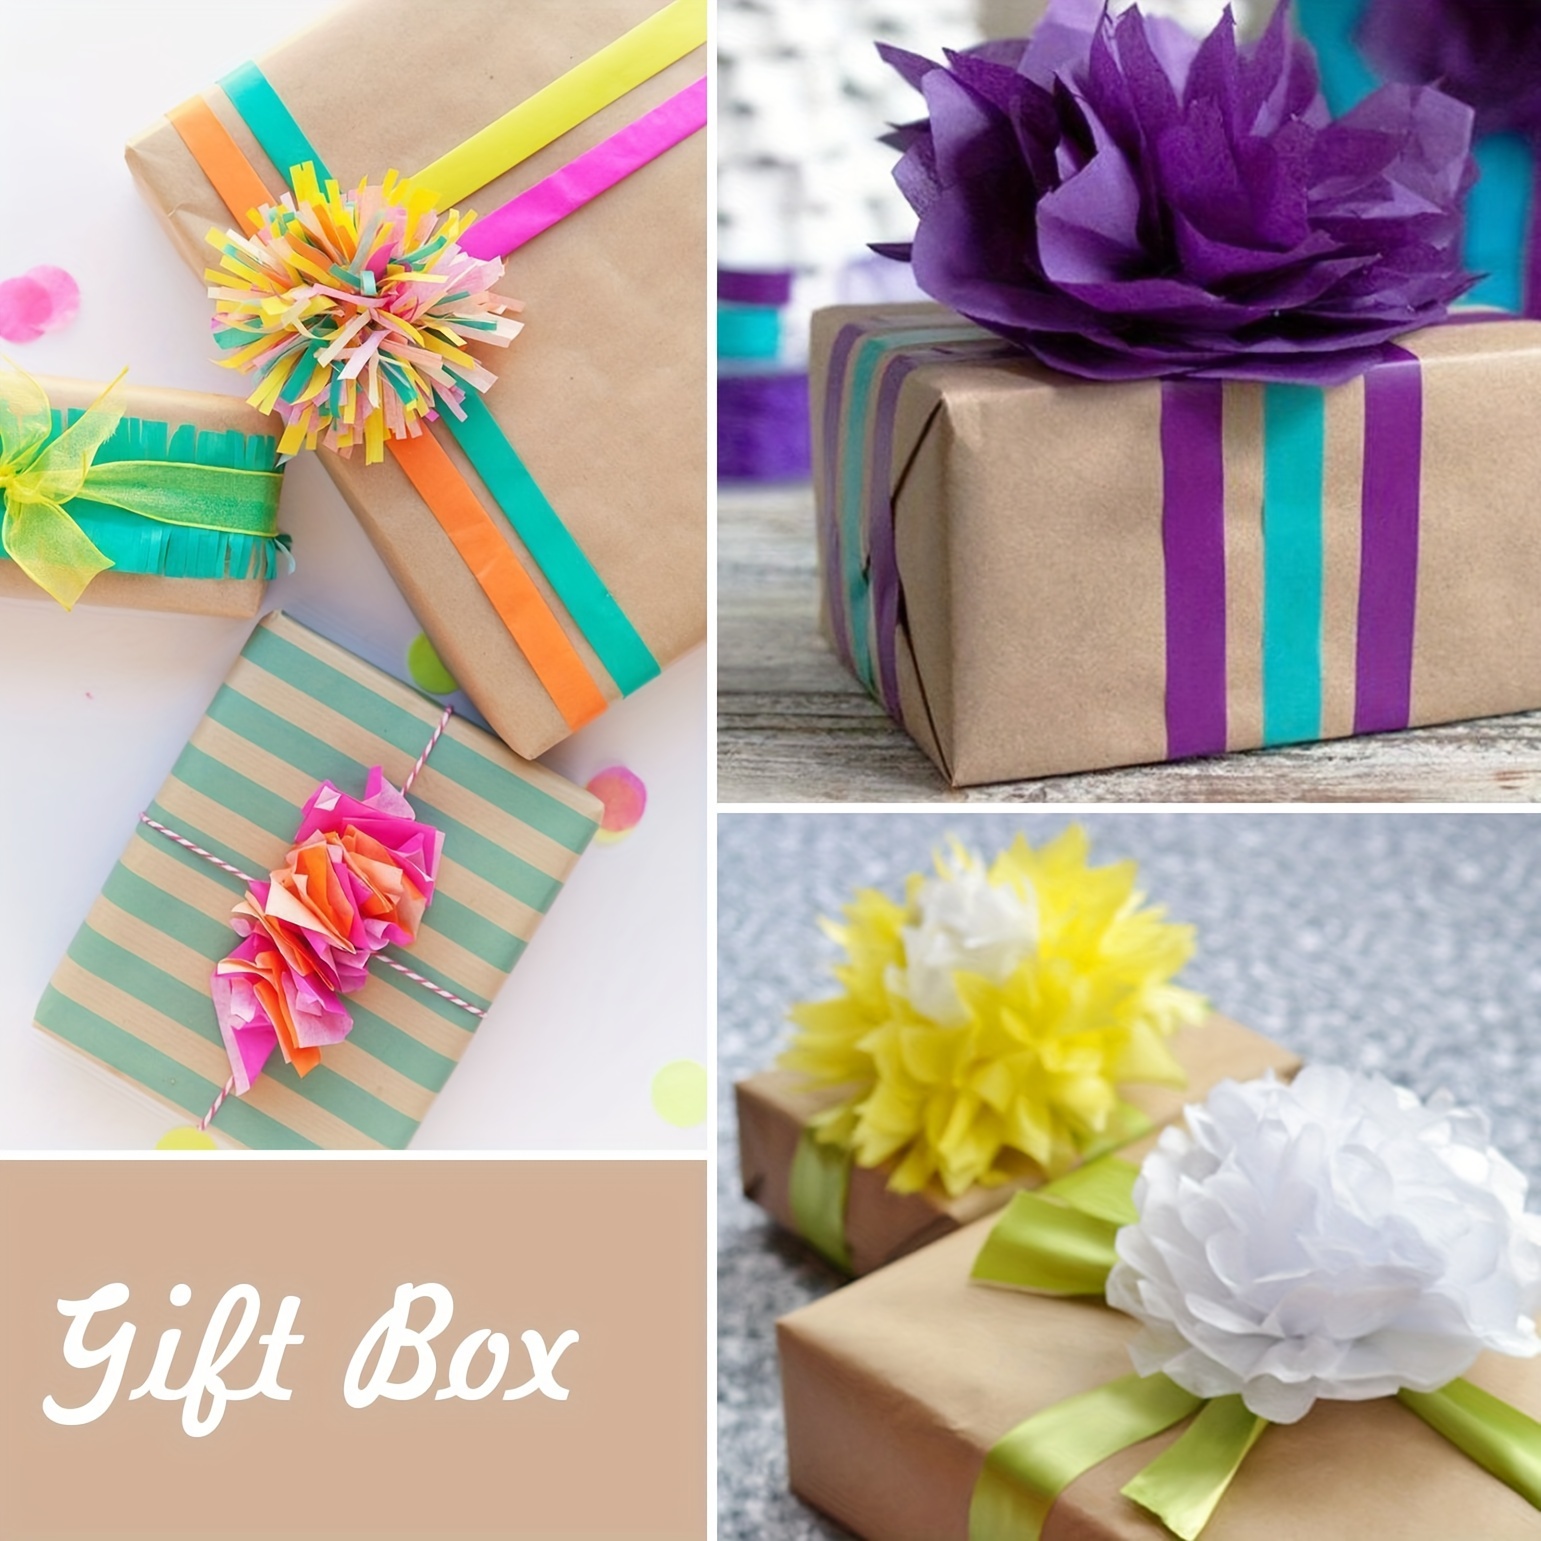 Colorful Tissue Paper Wrapping / Gift Paper Tissue in Packaging